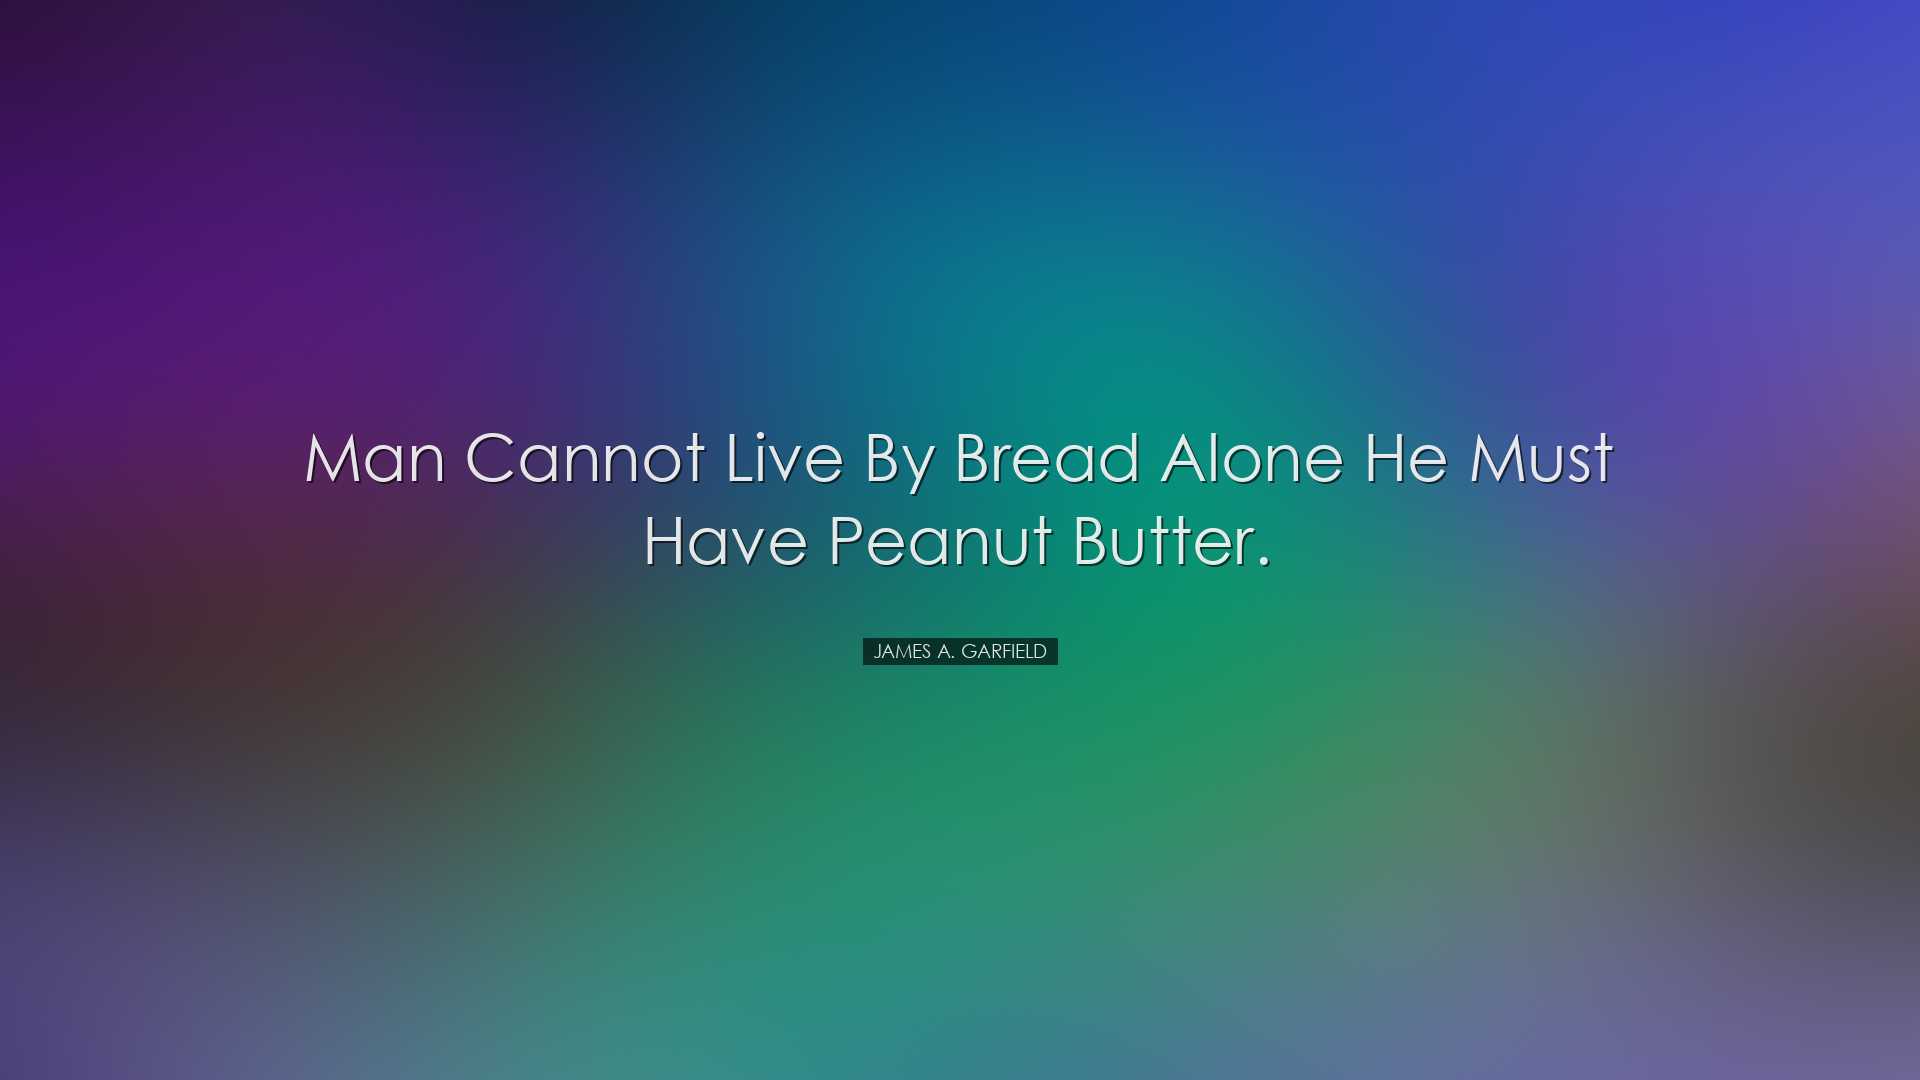 Man cannot live by bread alone he must have peanut butter. - James